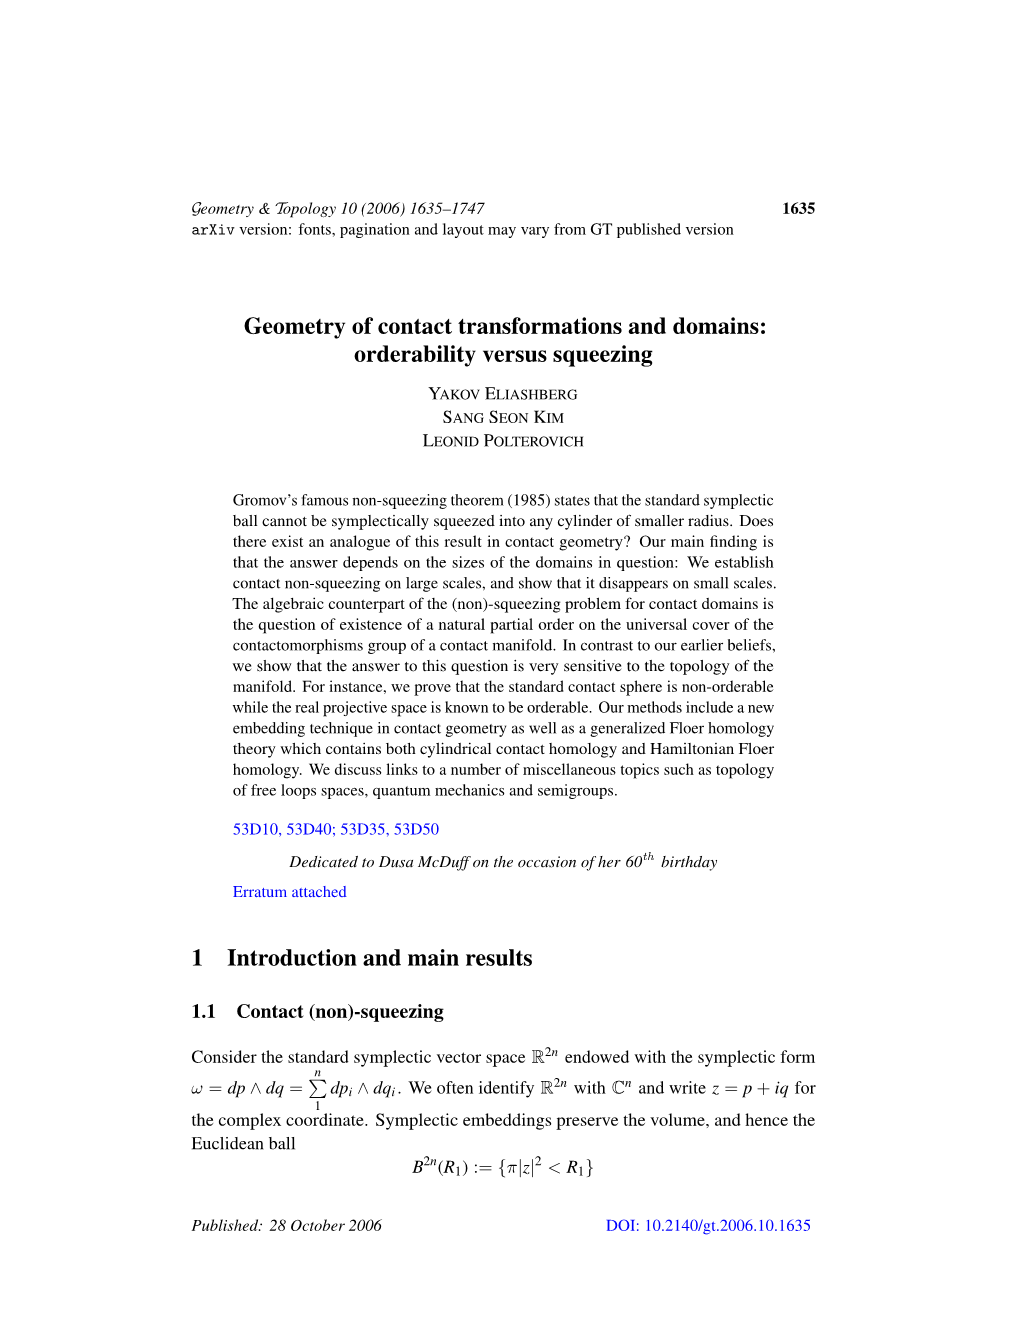 Geometry of Contact Transformations and Domains: Orderability Versus Squeezing